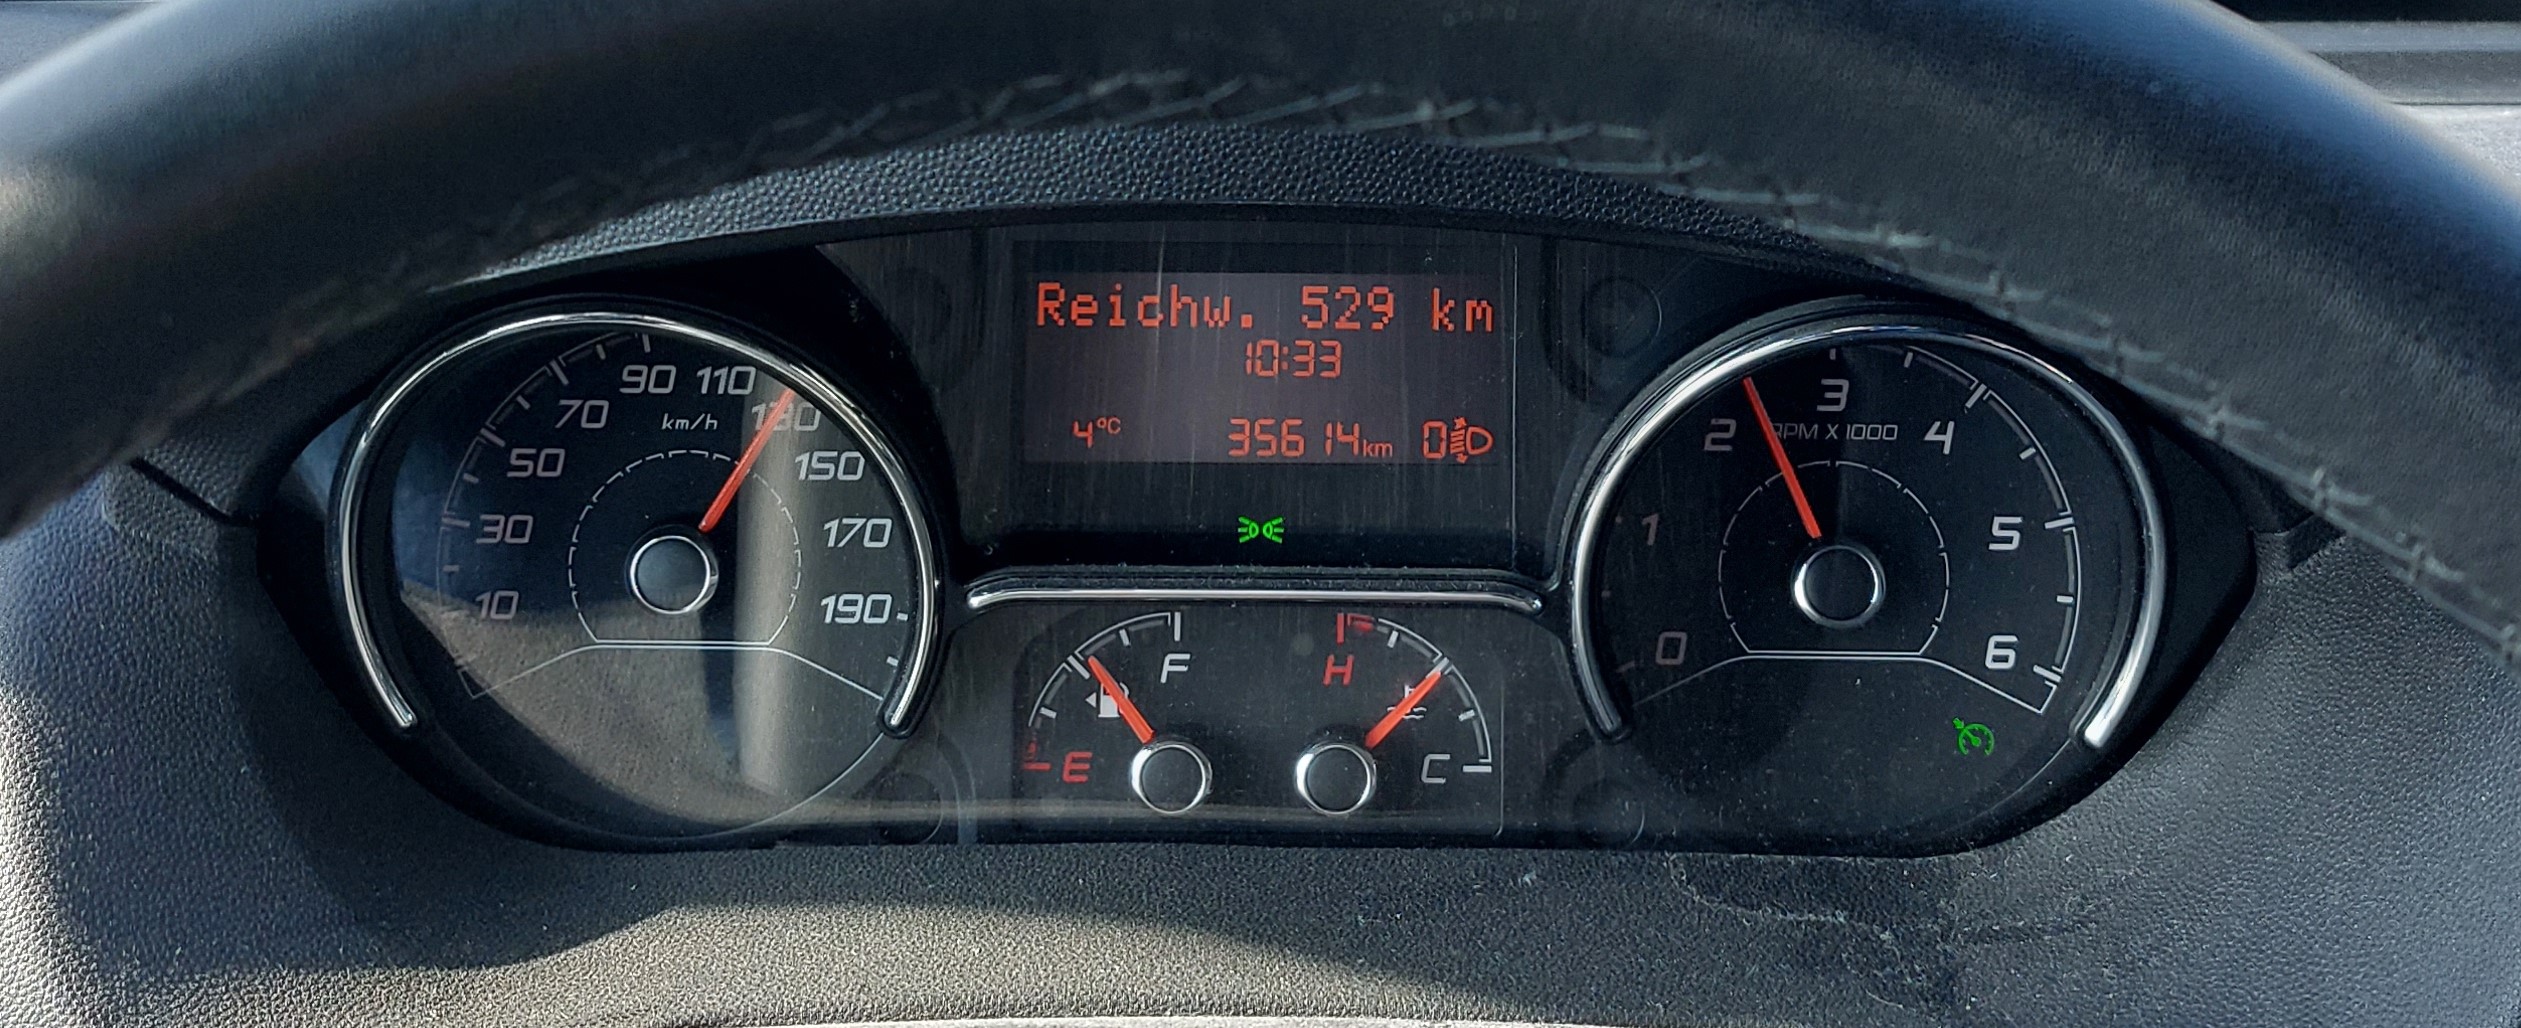 Fiat Ducato Heads Up Display